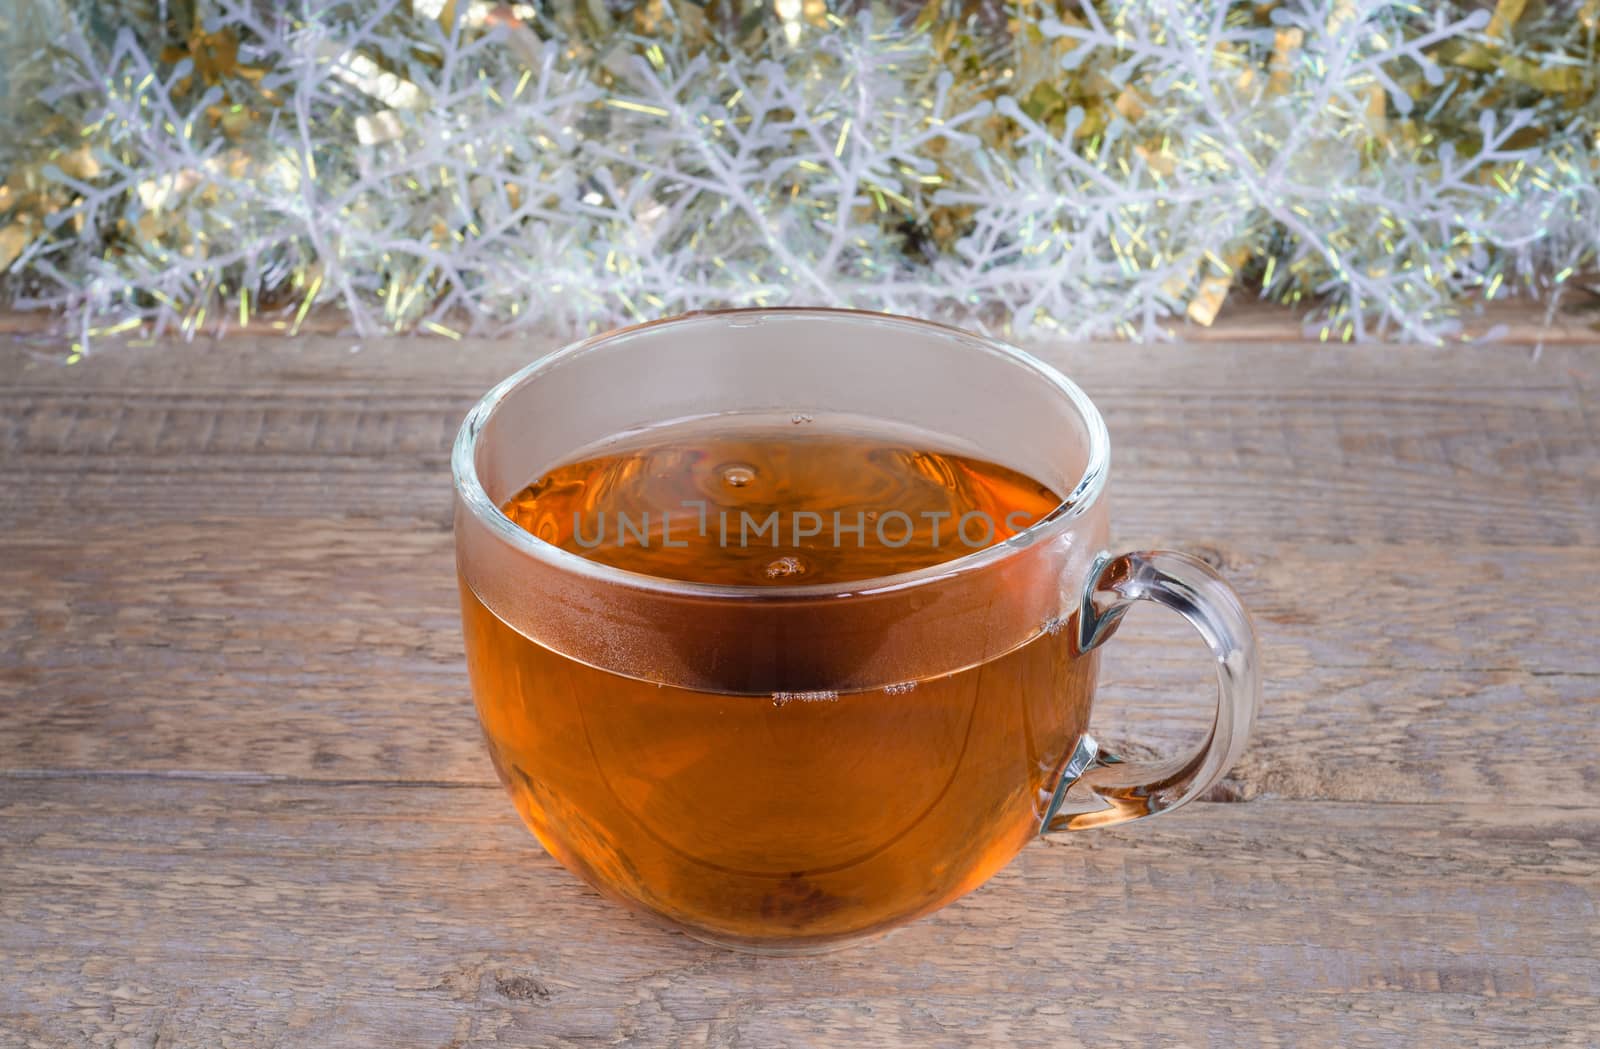 Cup of hot tea on background and old wooden surface. Place for text.